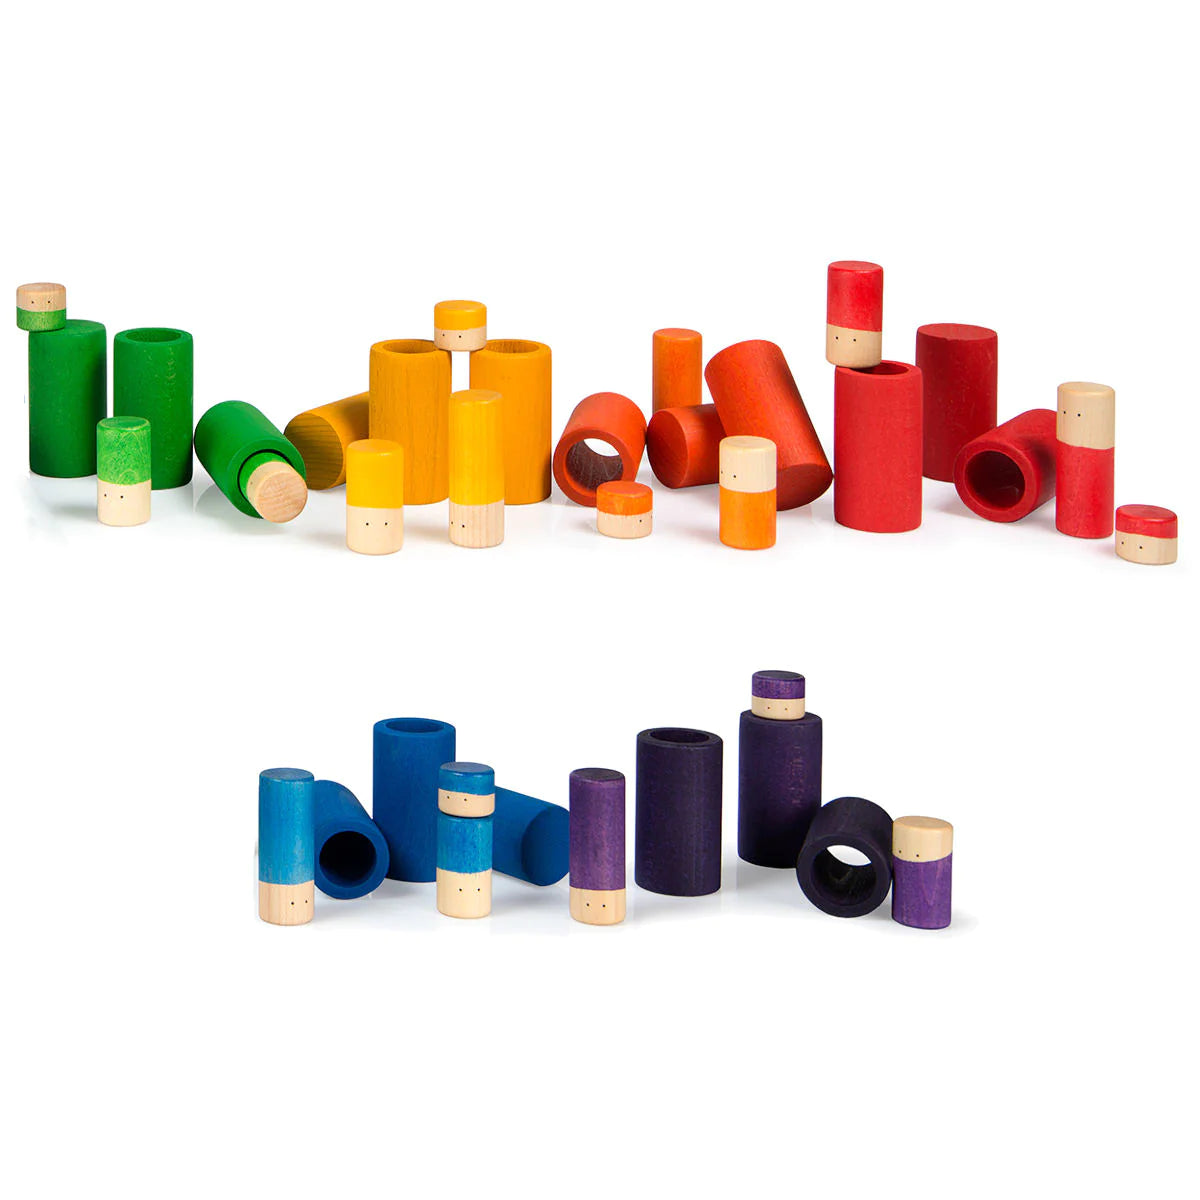 LO Wooden Play Set Basic Colors